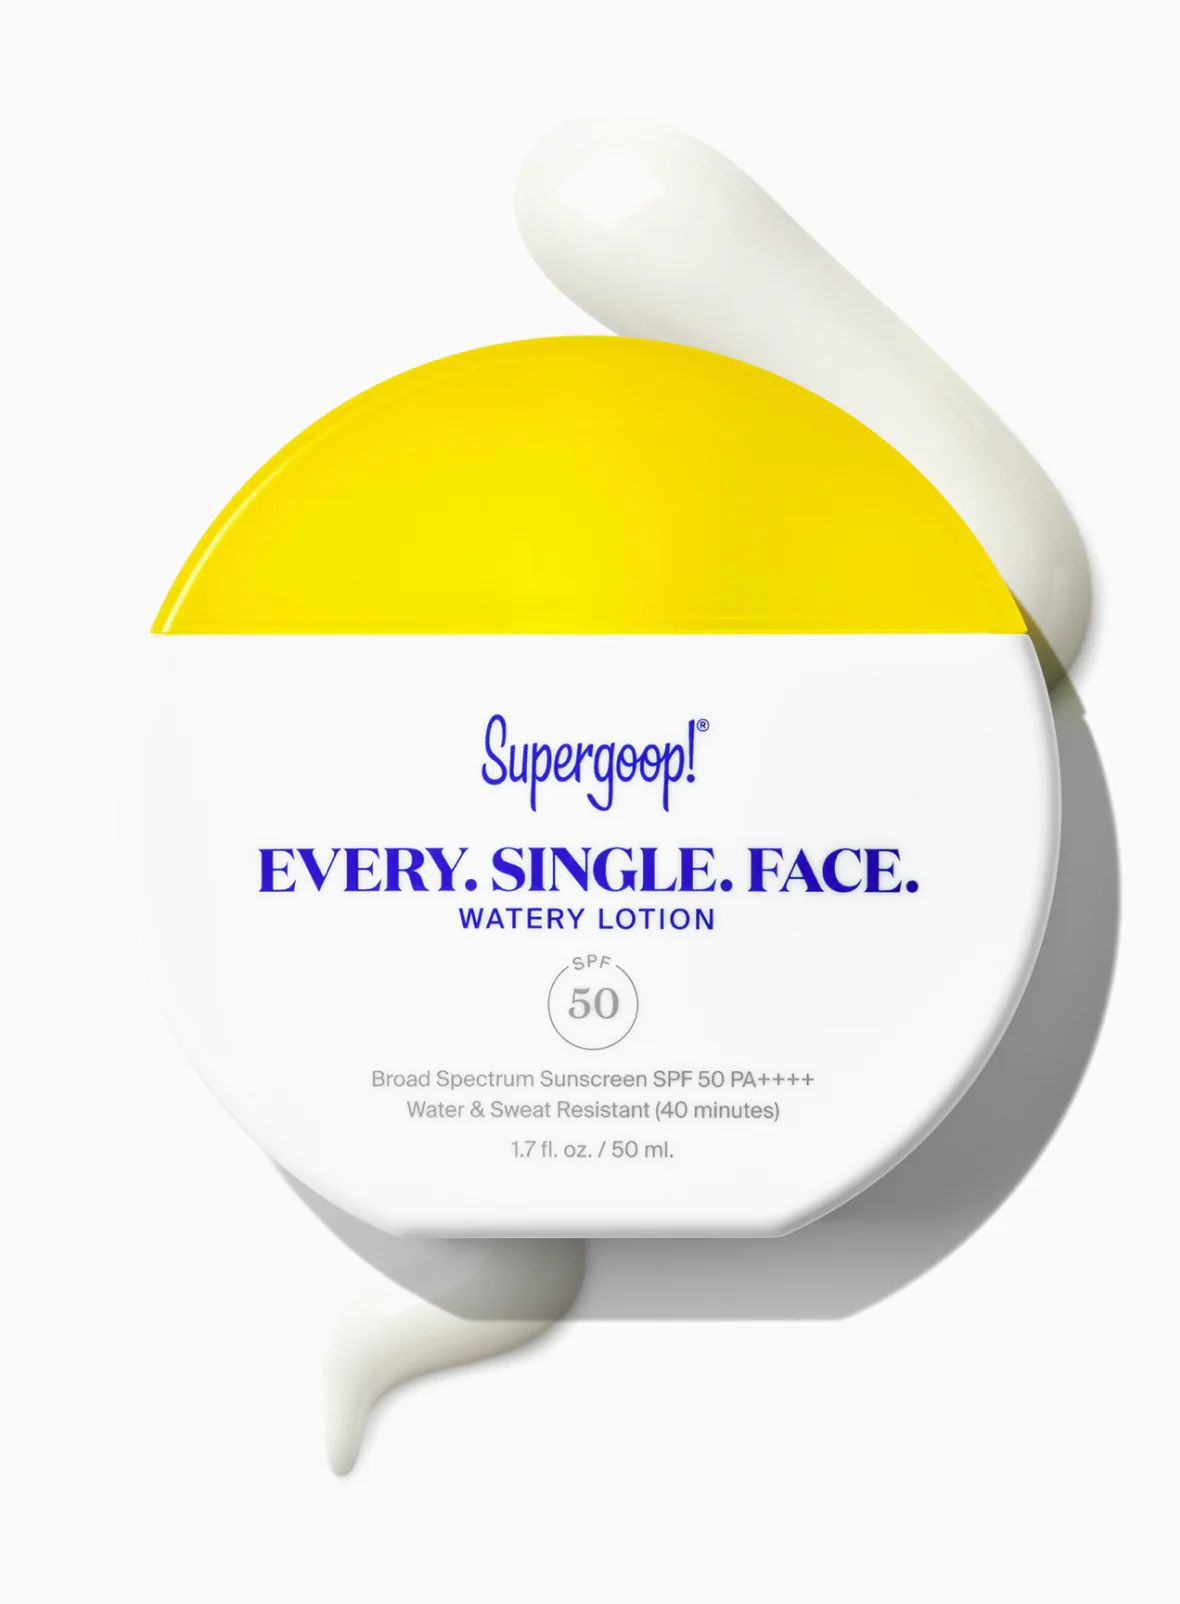 Every. Single. Face. Watery Lotion SPF 50 | Supergoop